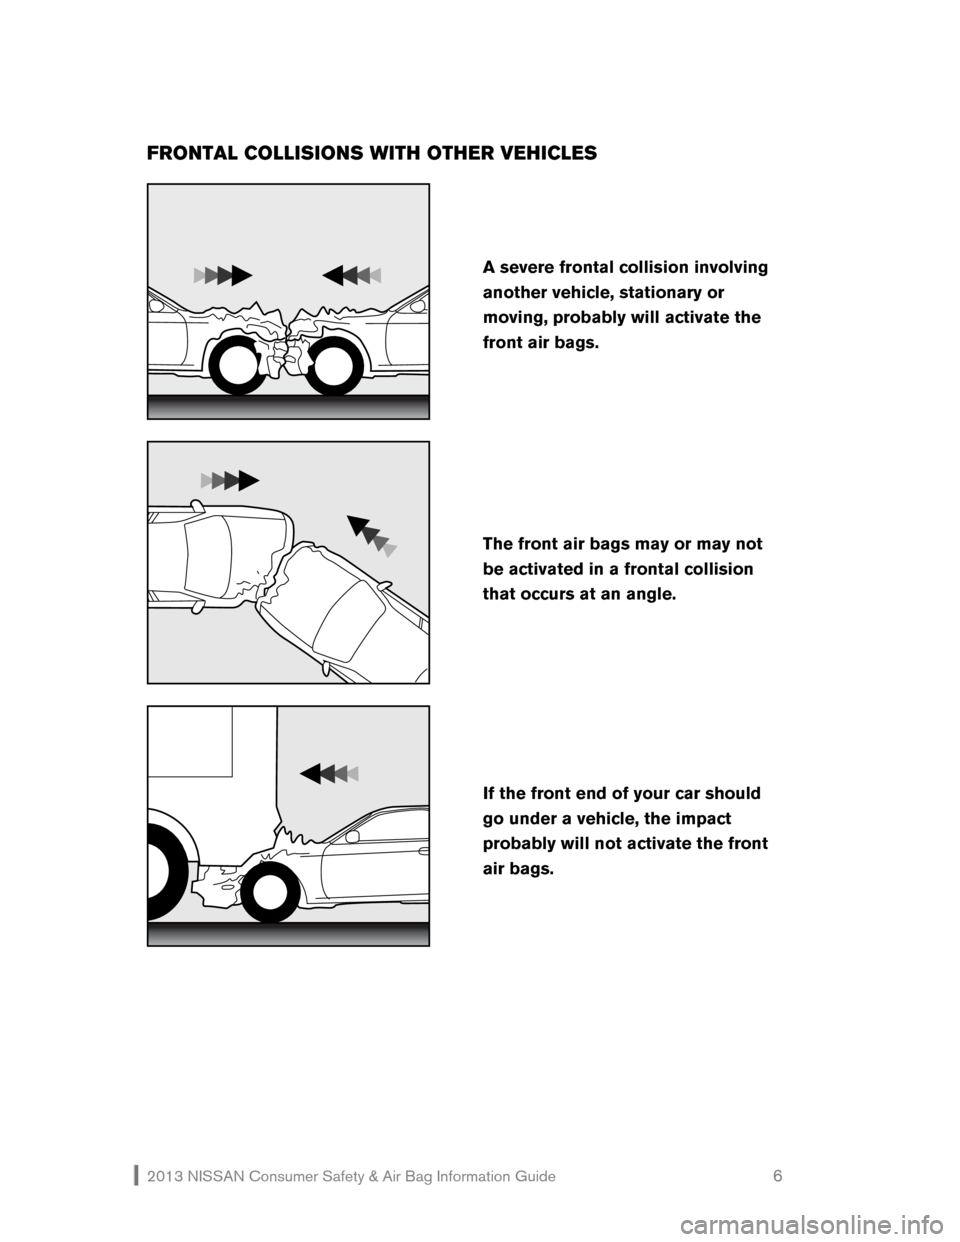 NISSAN CUBE 2013 3.G Consumer Safety Air Bag Information Guide 2013 NISSAN Consumer Safety & Air Bag Information Guide                                                   6 
FRONTAL COLLISIONS WITH OTHER VEHICLES 
 
 
 
 
If the front end of your car should 
go und